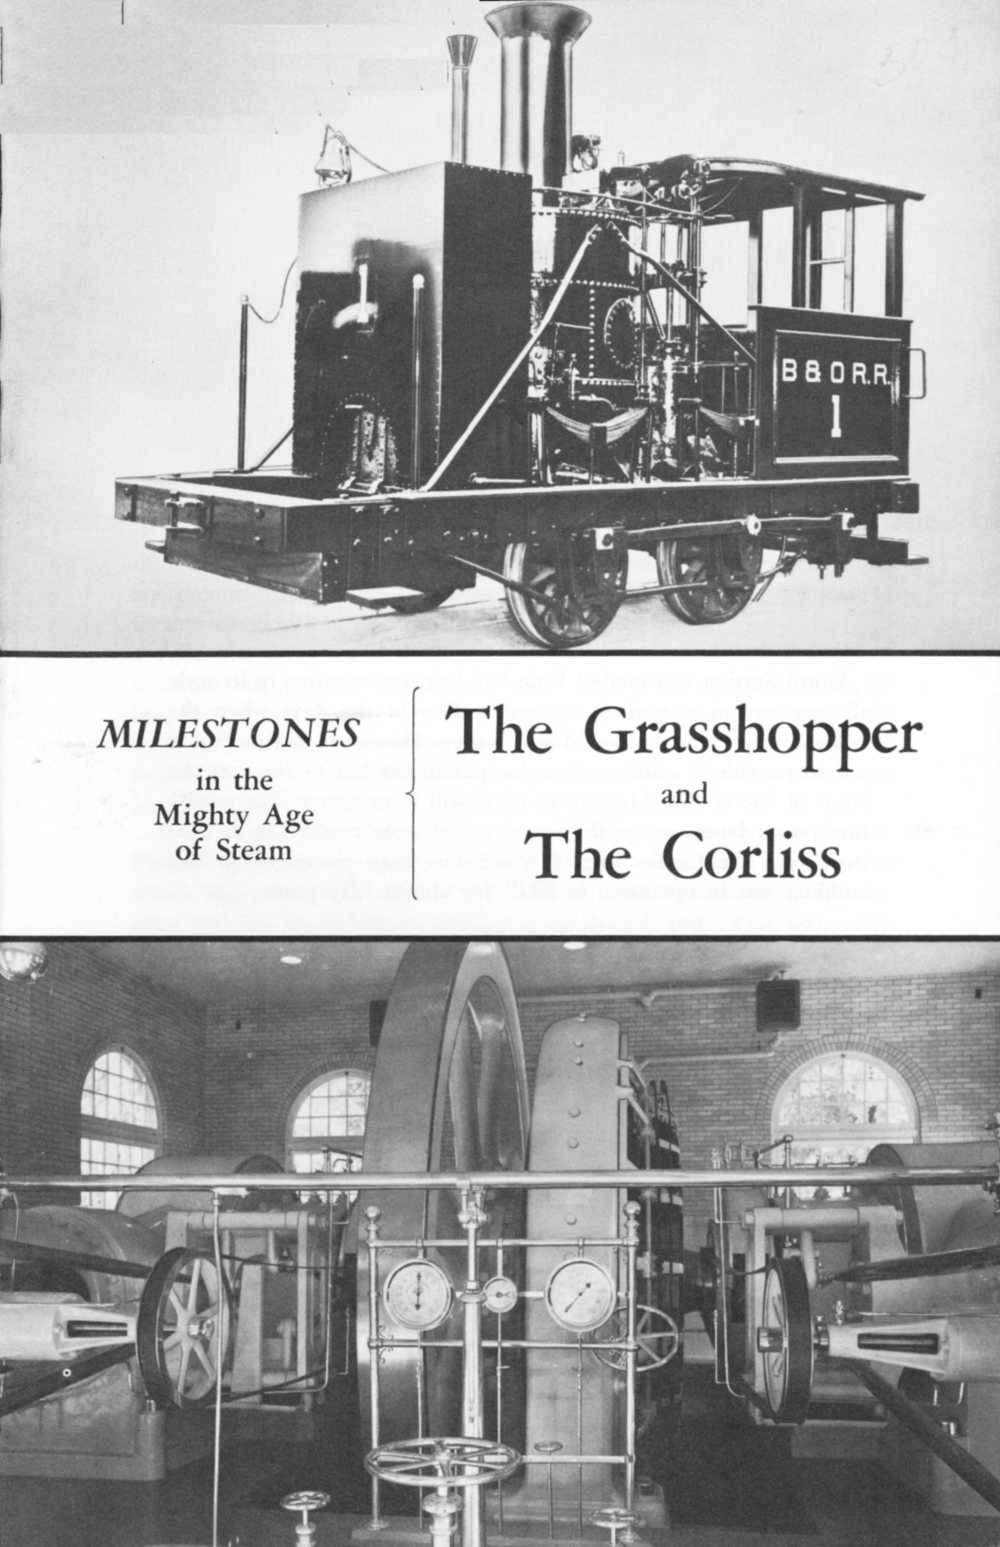 The Grasshopper and The Corliss: Milestones in the Mighty Age of Steam